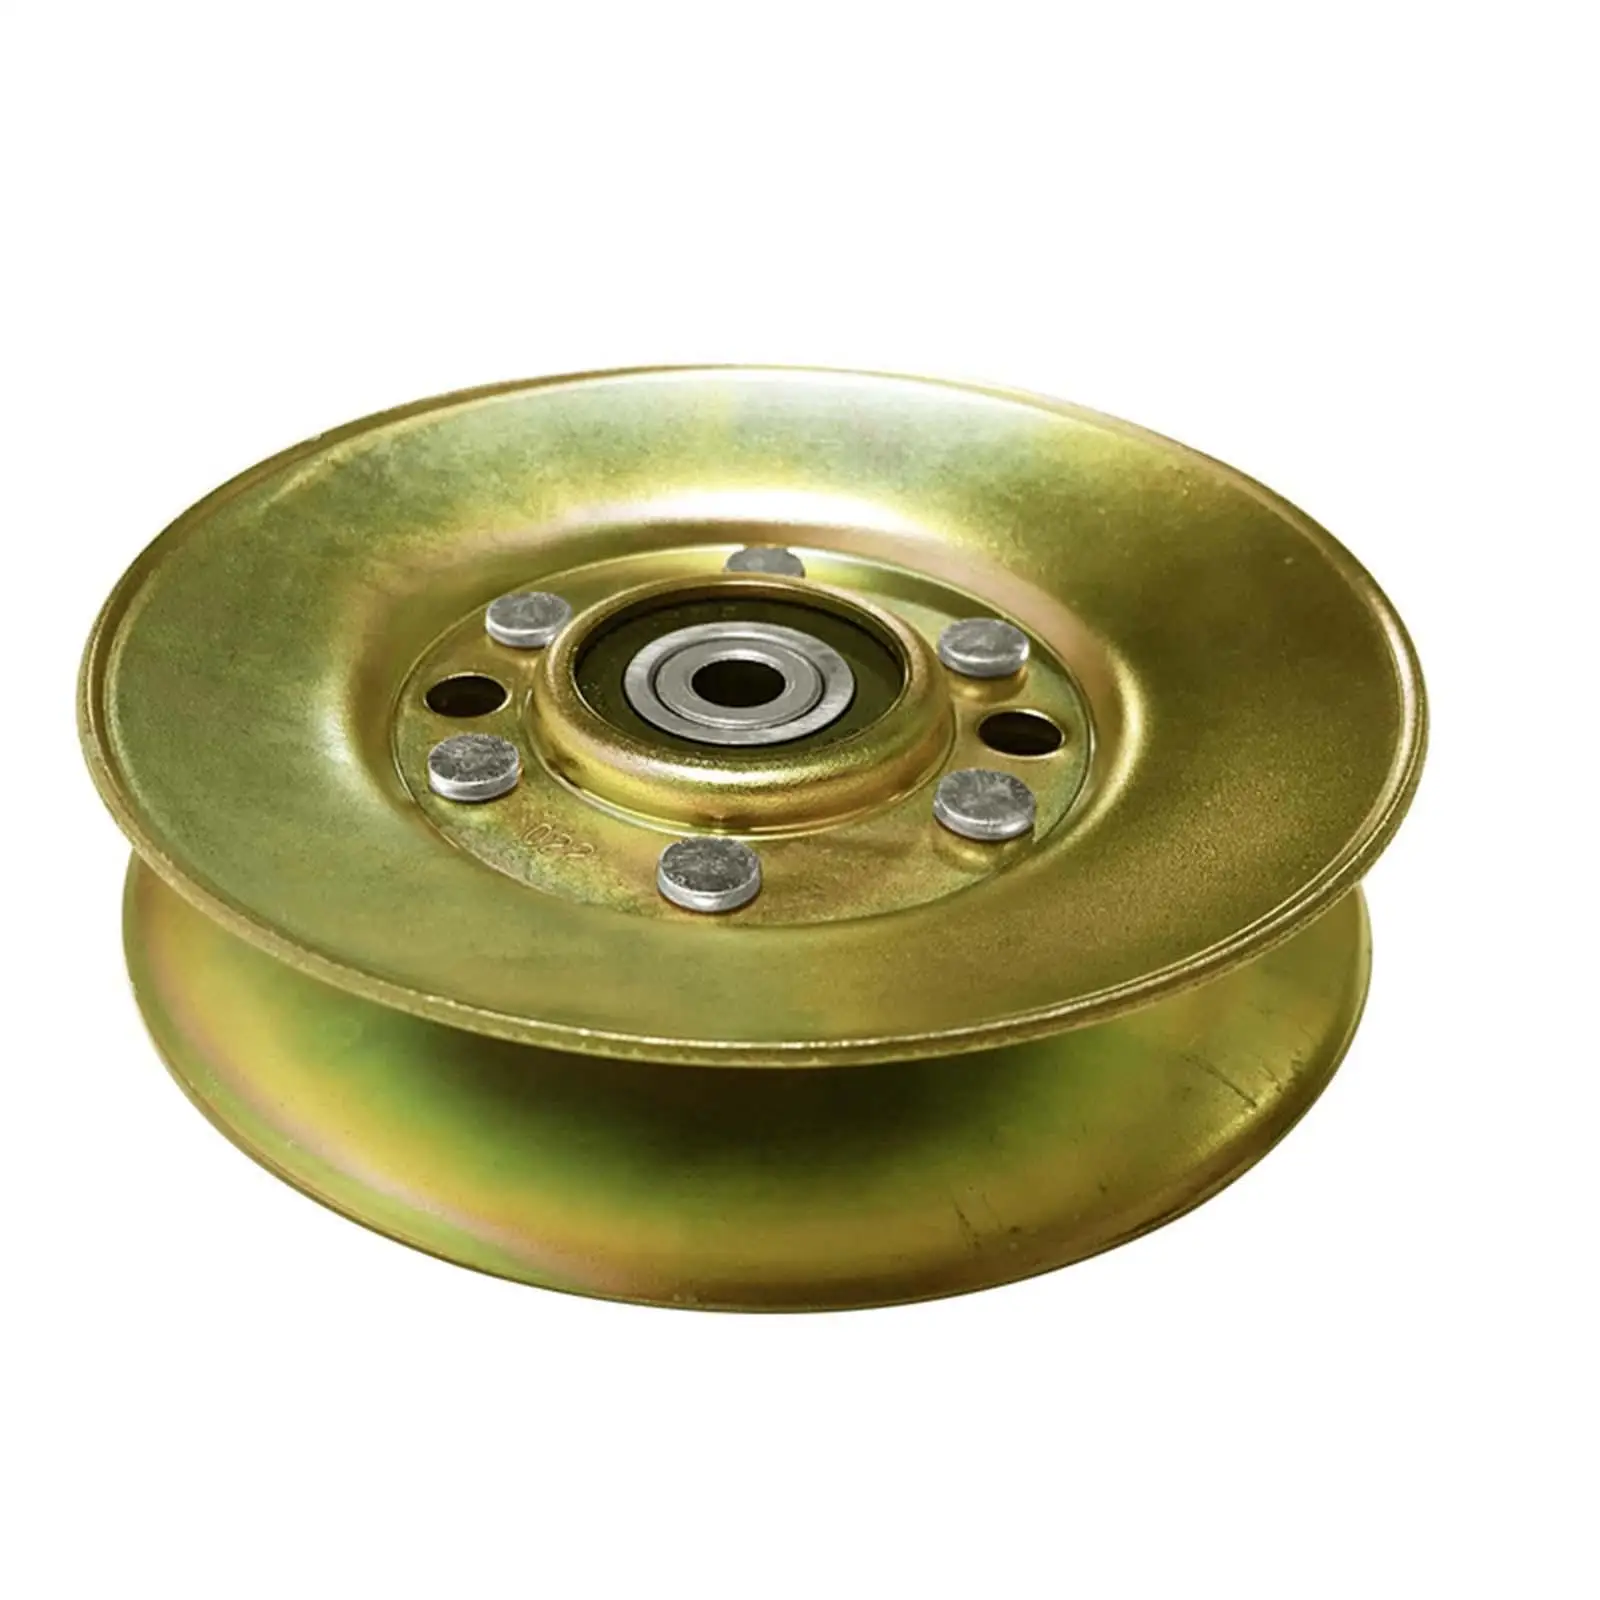 Pulley Replaces Flat Idler Pulley for MTD 756-04522 Accessories